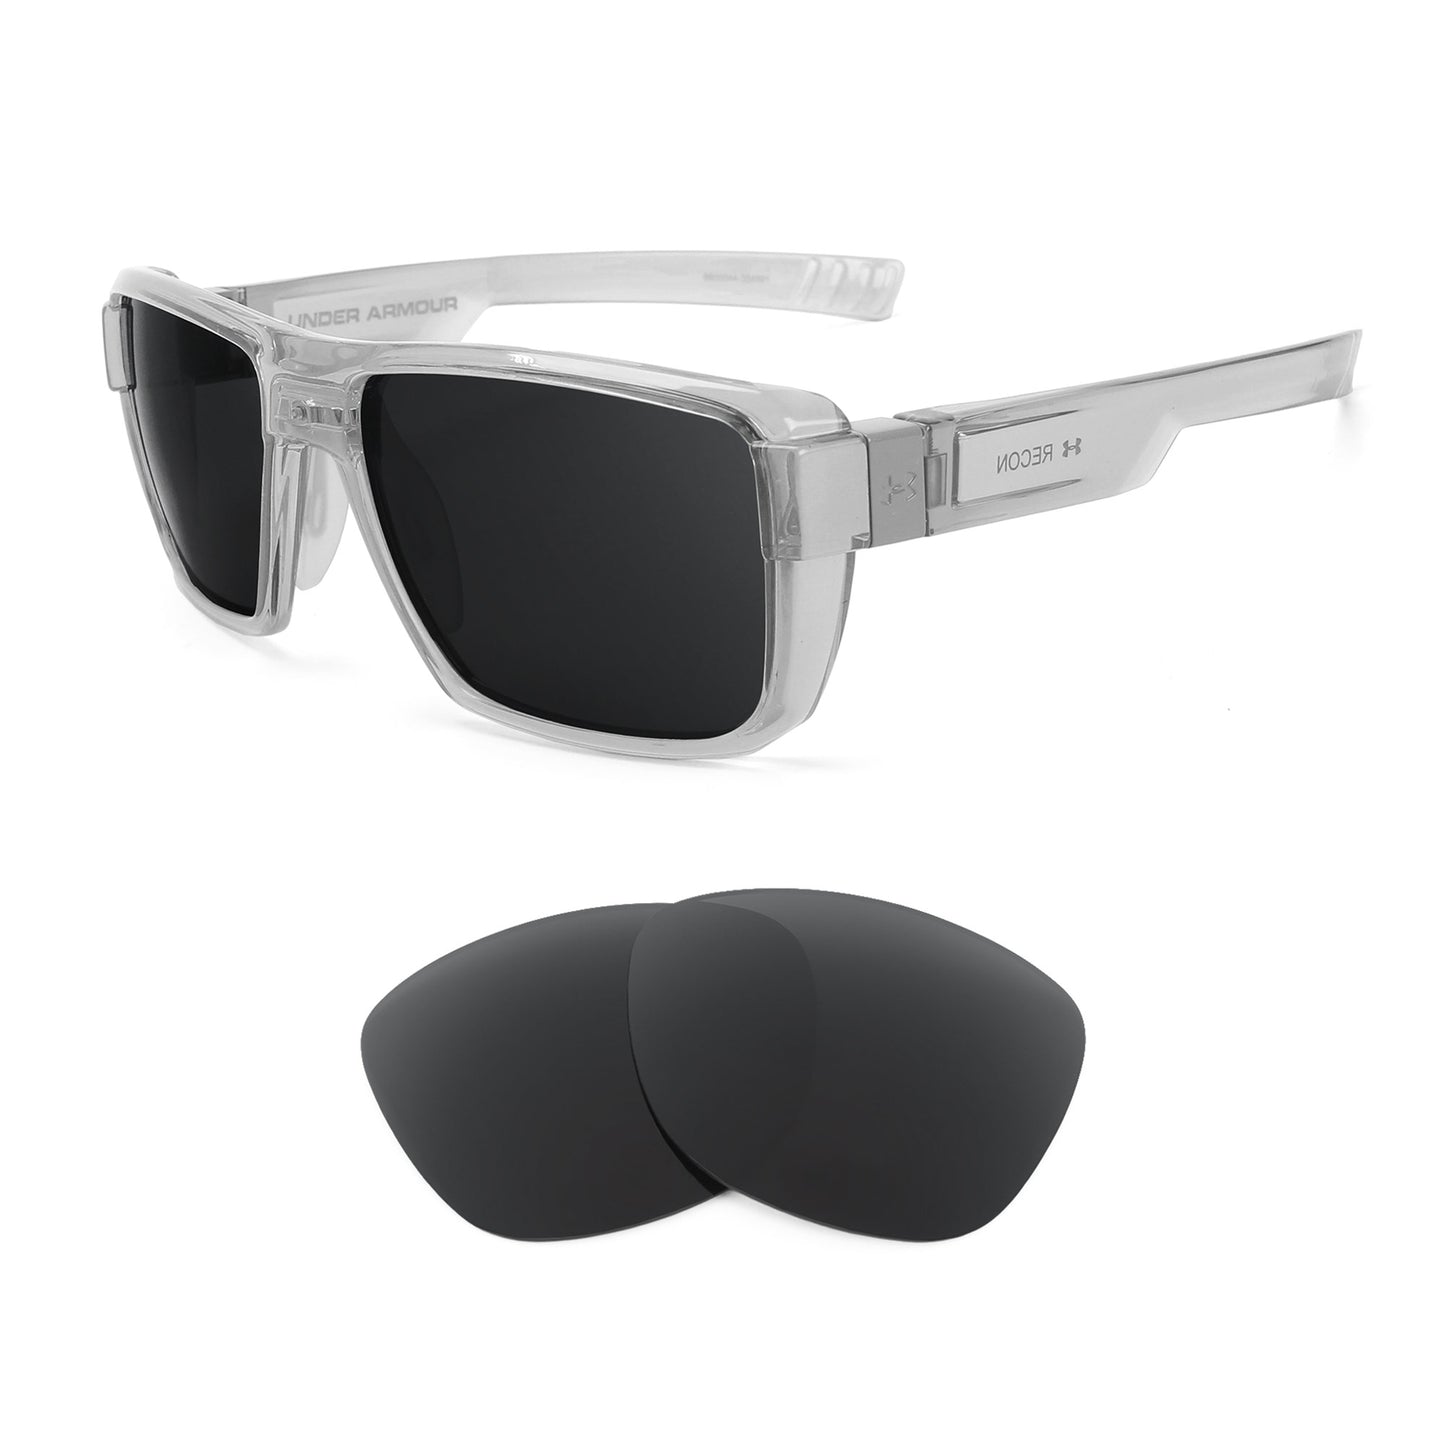 Under Armour Recon sunglasses with replacement lenses